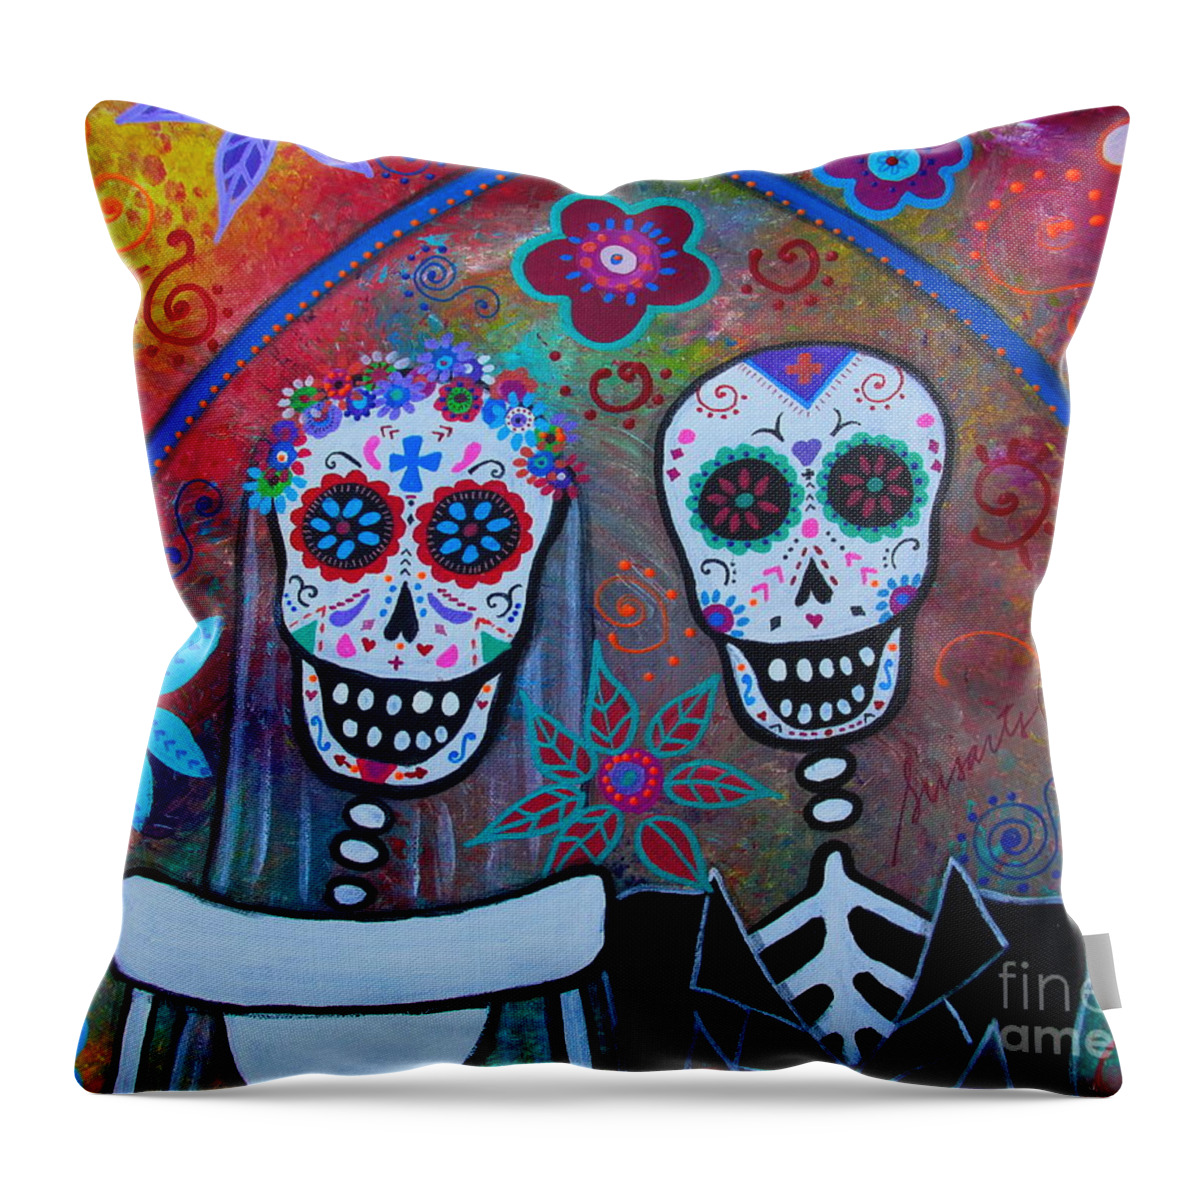 Wedding Throw Pillow featuring the painting Our Love by Pristine Cartera Turkus